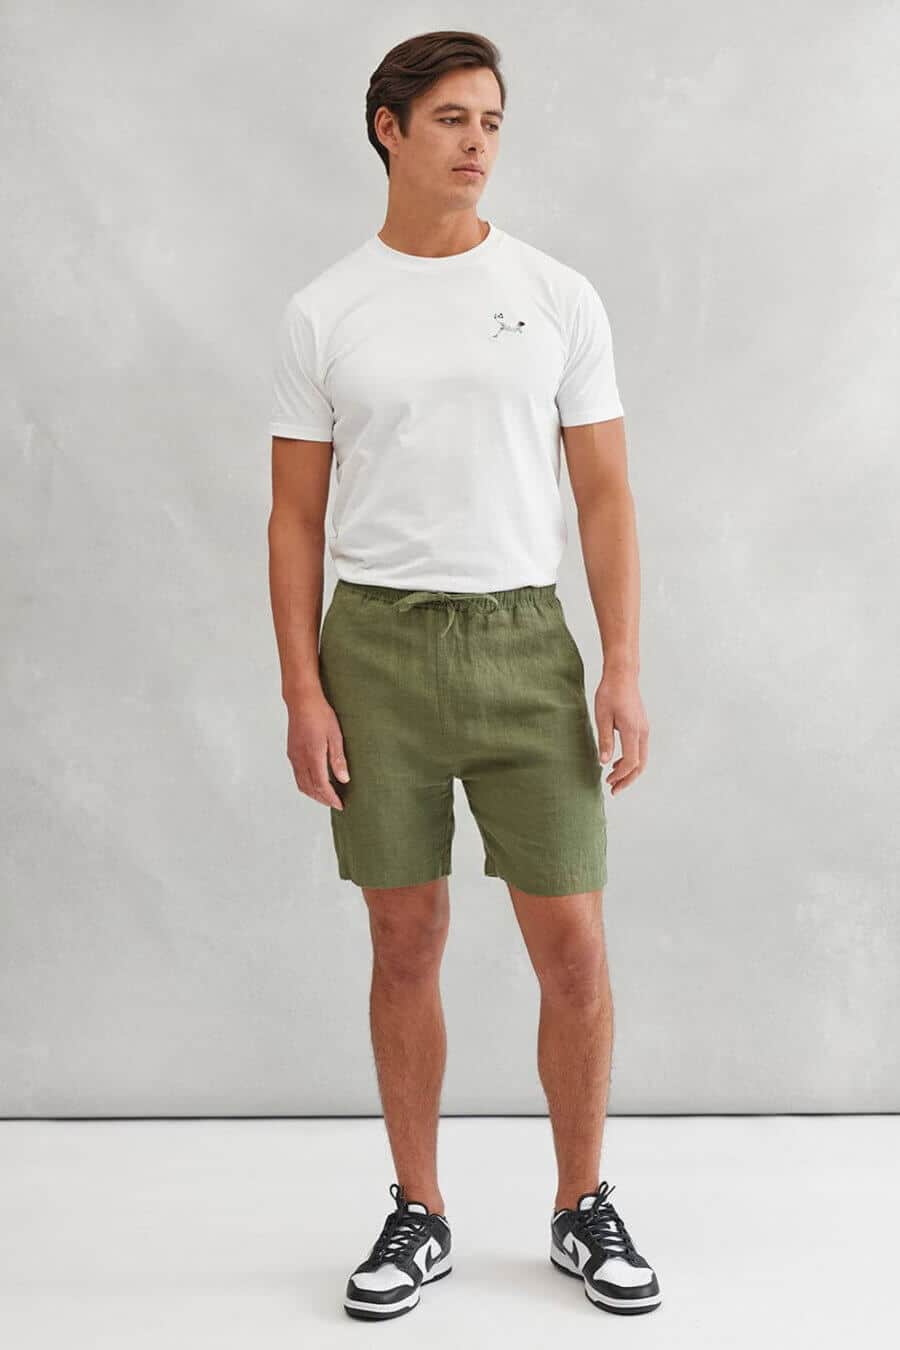 Men's green linen shorts with white T-shirt and Nike Dunks summer outfit